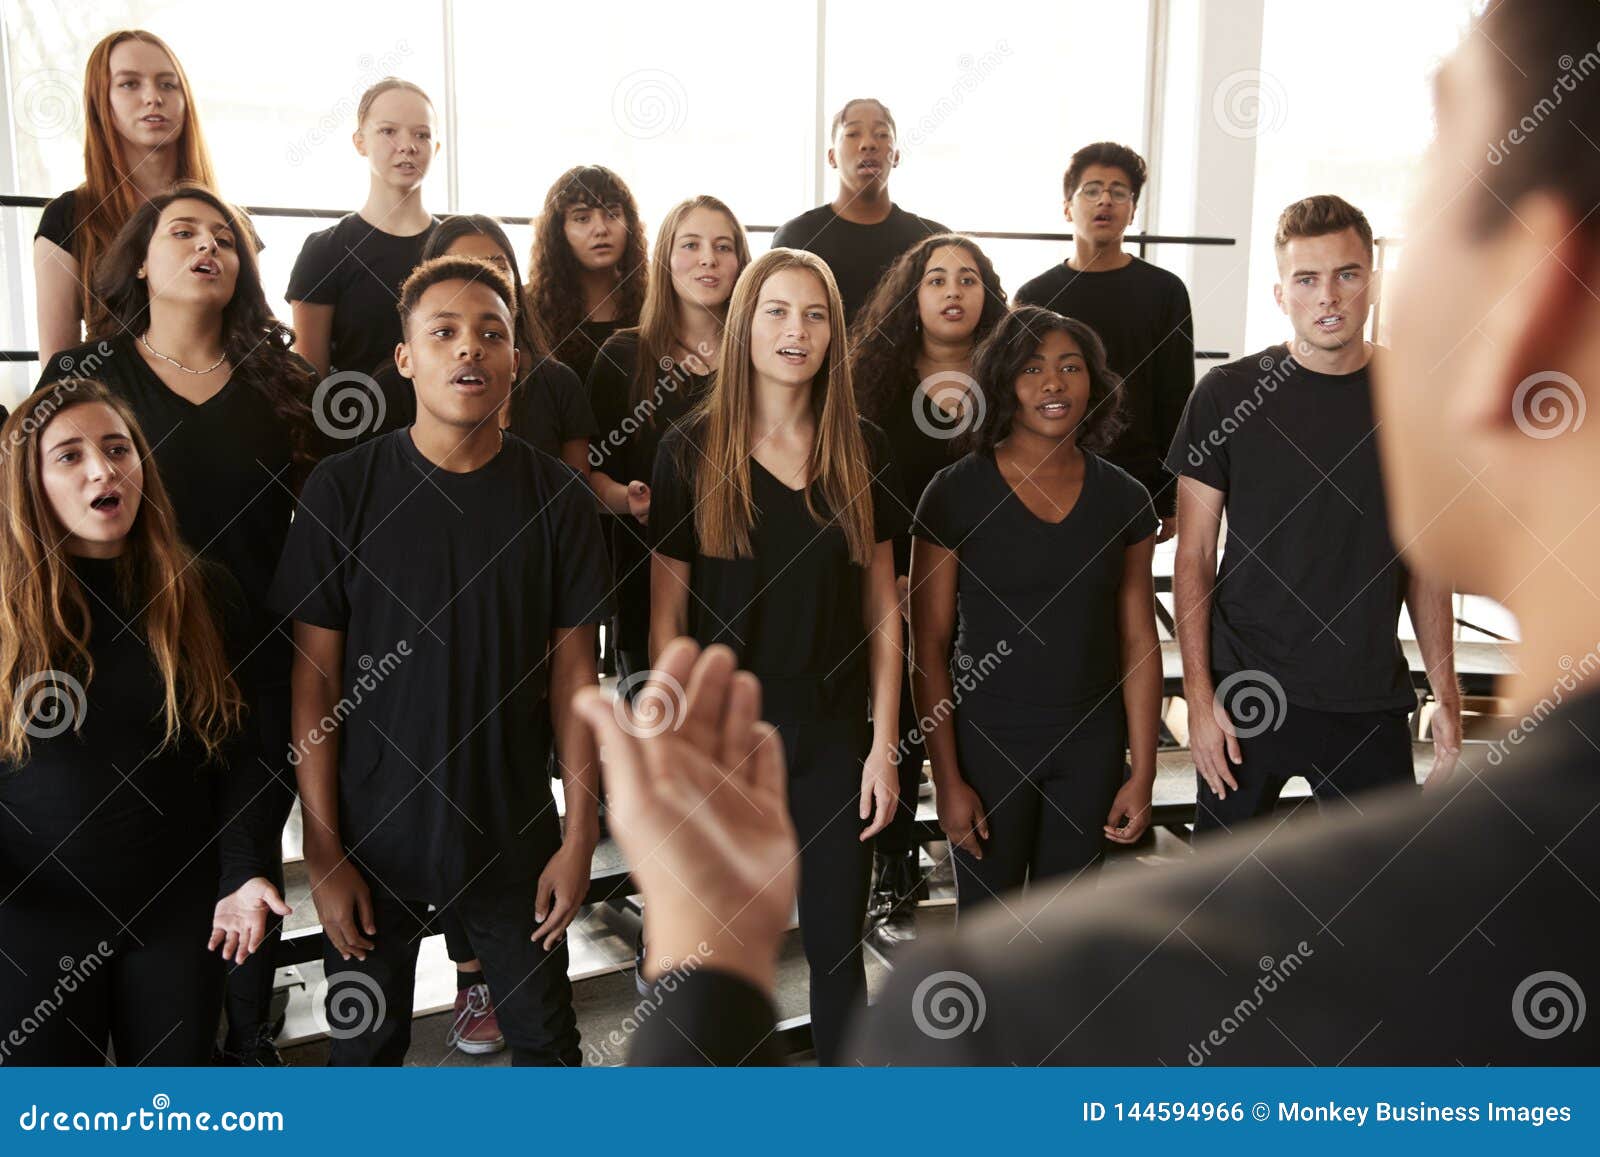 male and female students singing in choir with teacher at performing arts school